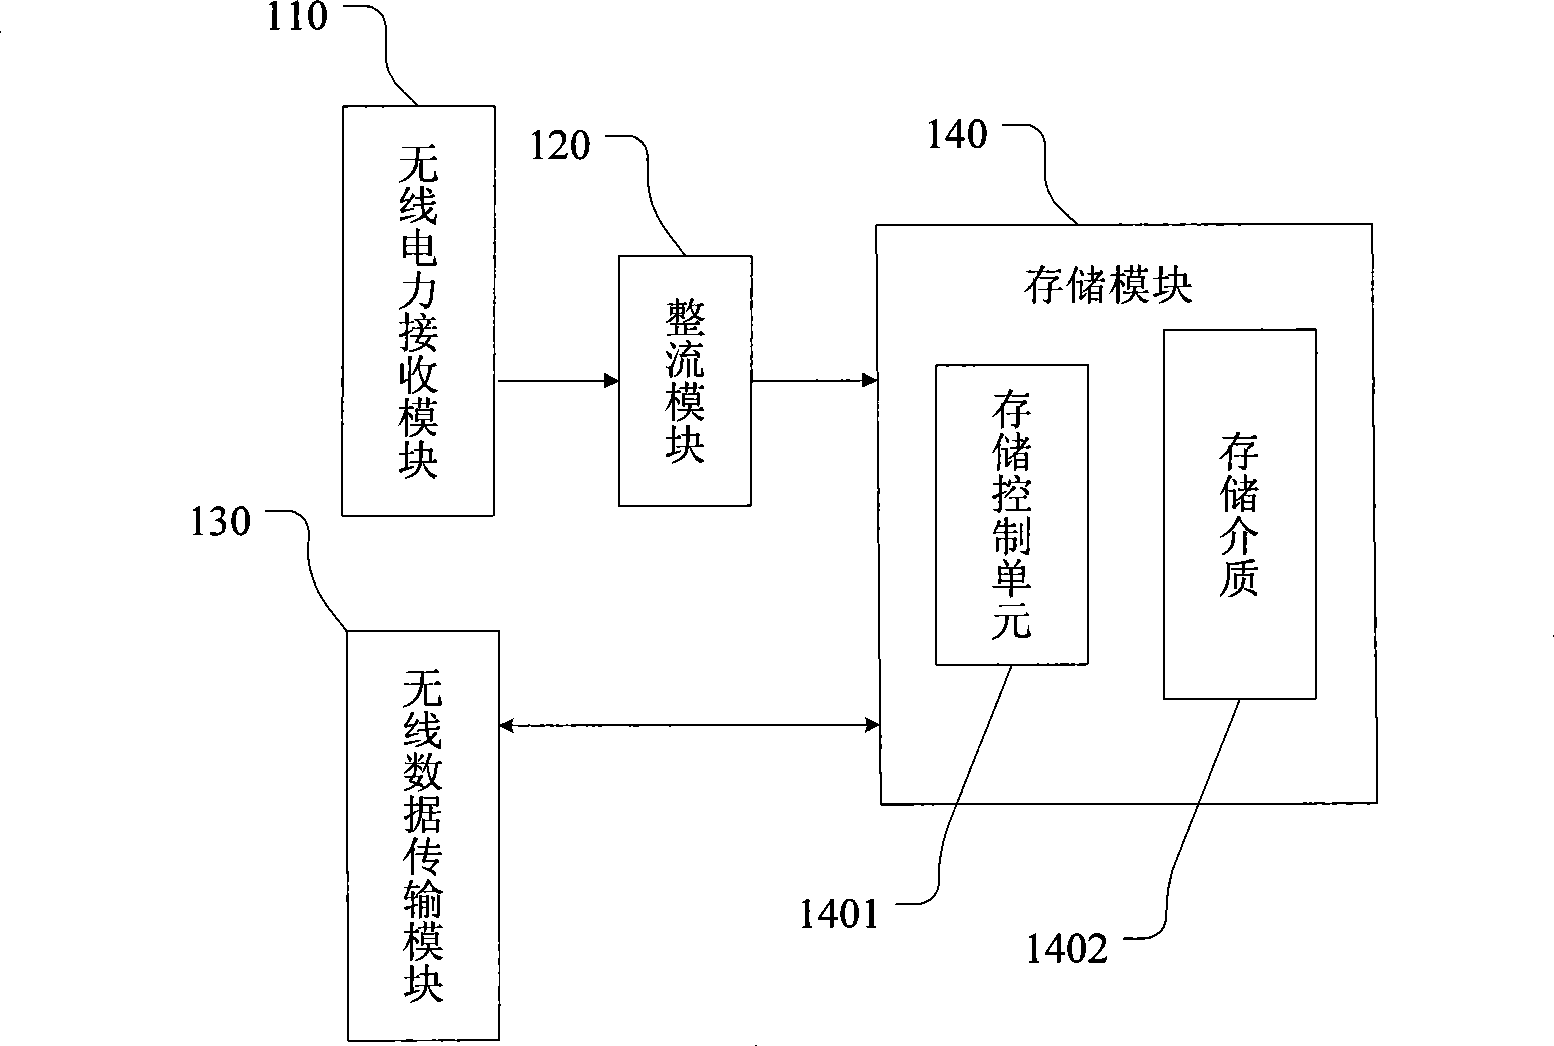 Wireless memory device, system and method